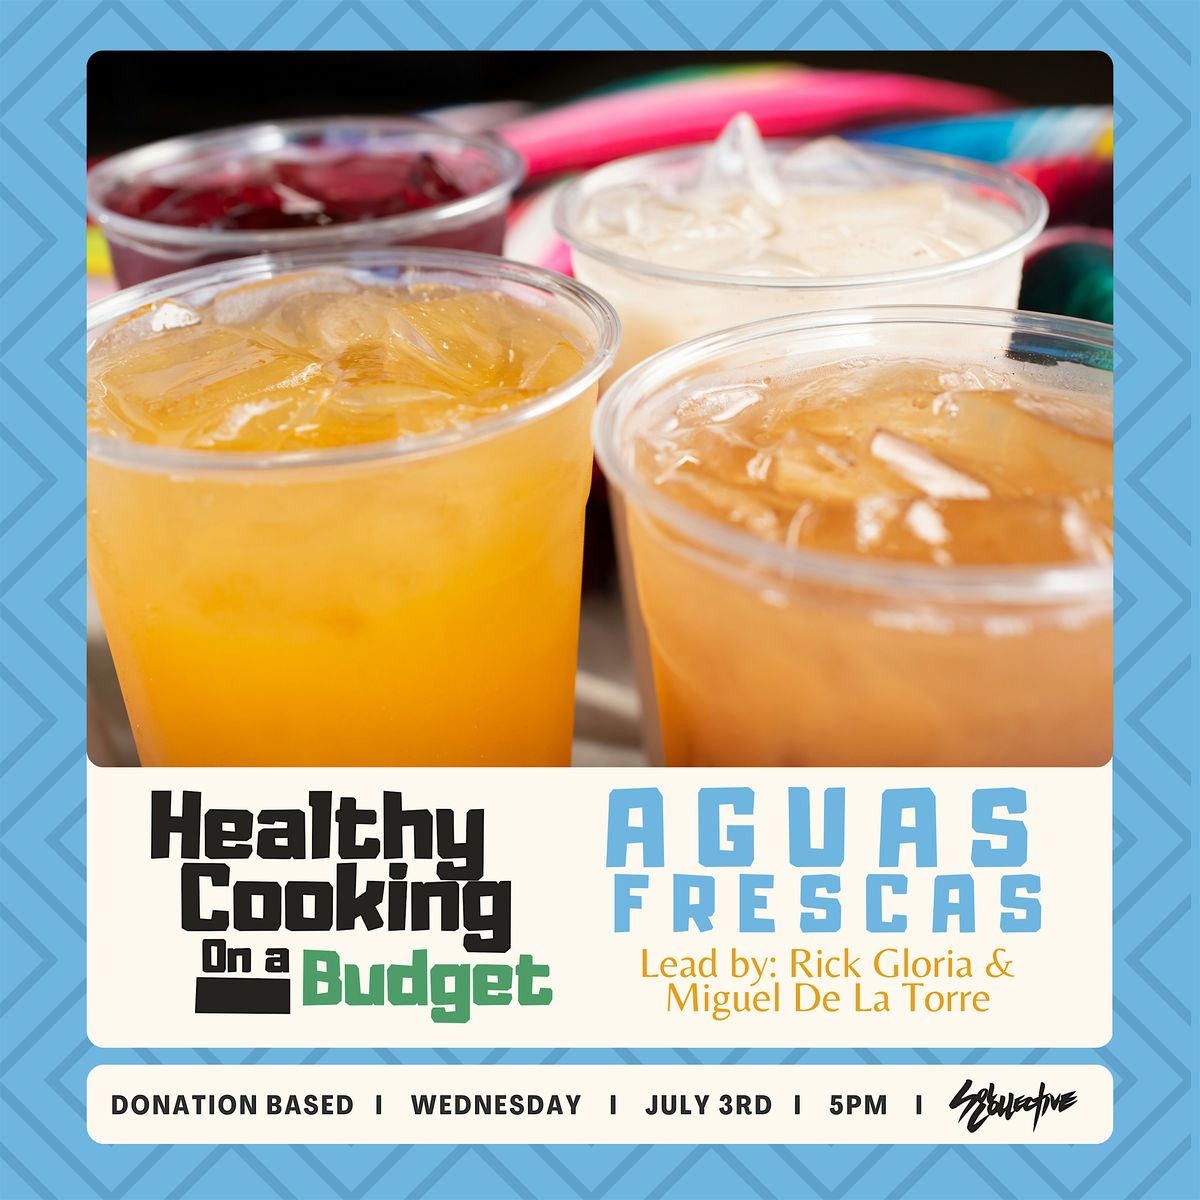 Healthy Cooking on a Budget: Aguas Frescas